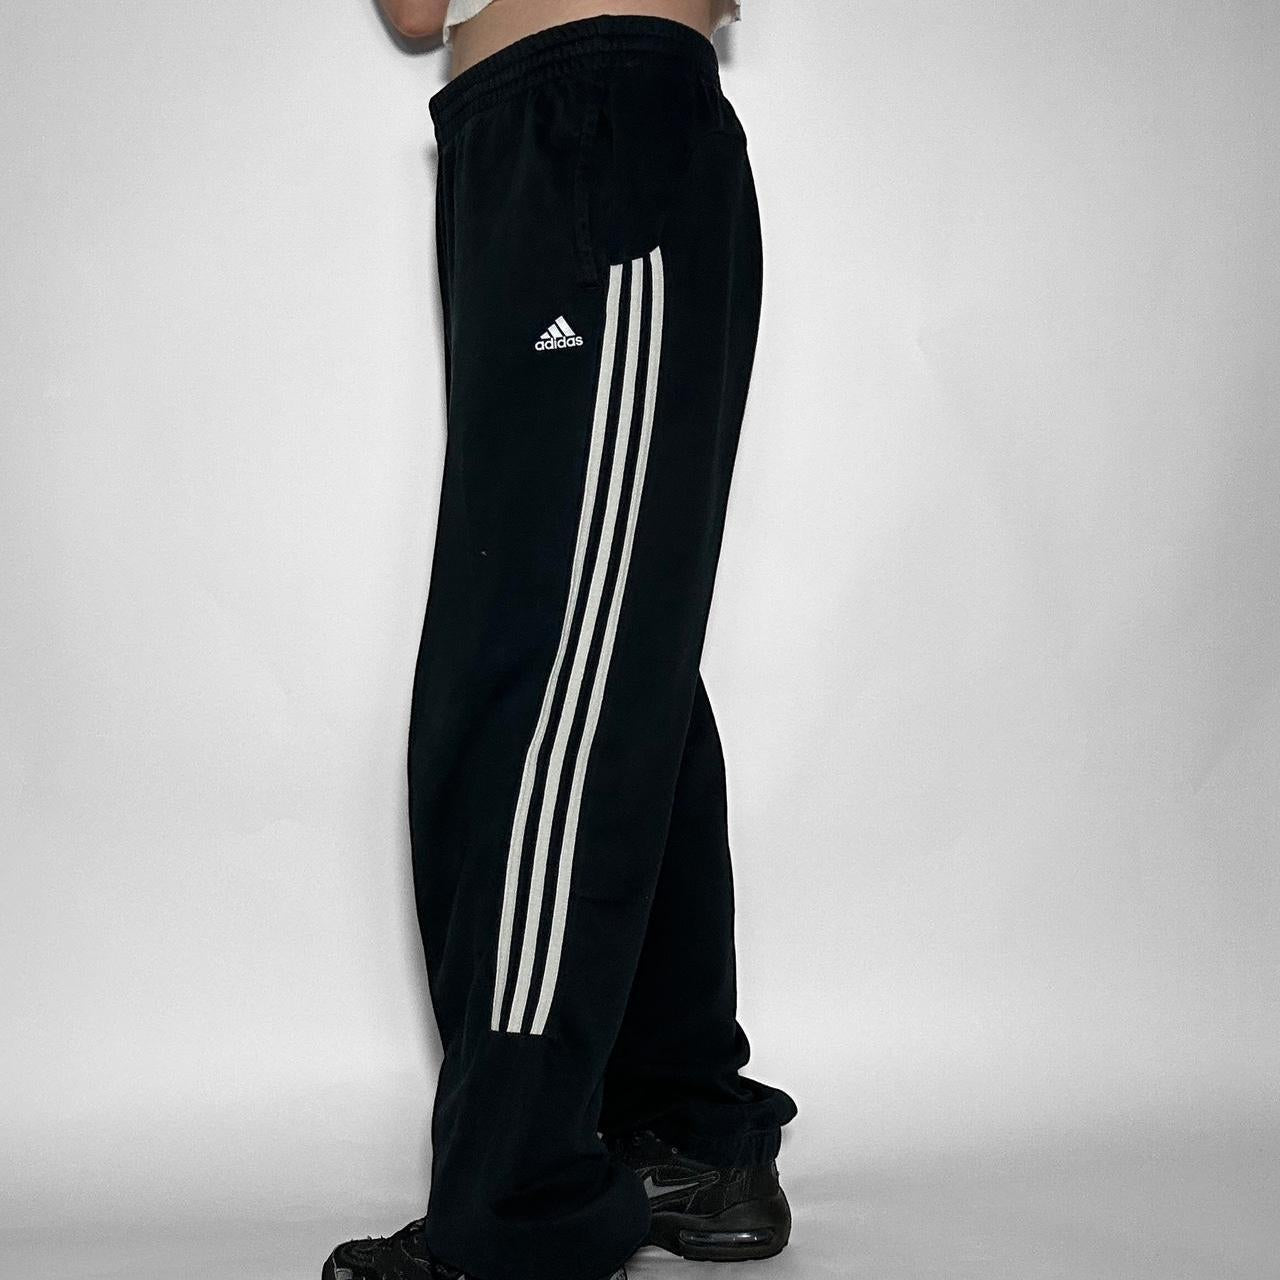 Vintage Adidas unisex black and white 90s baggy track pants